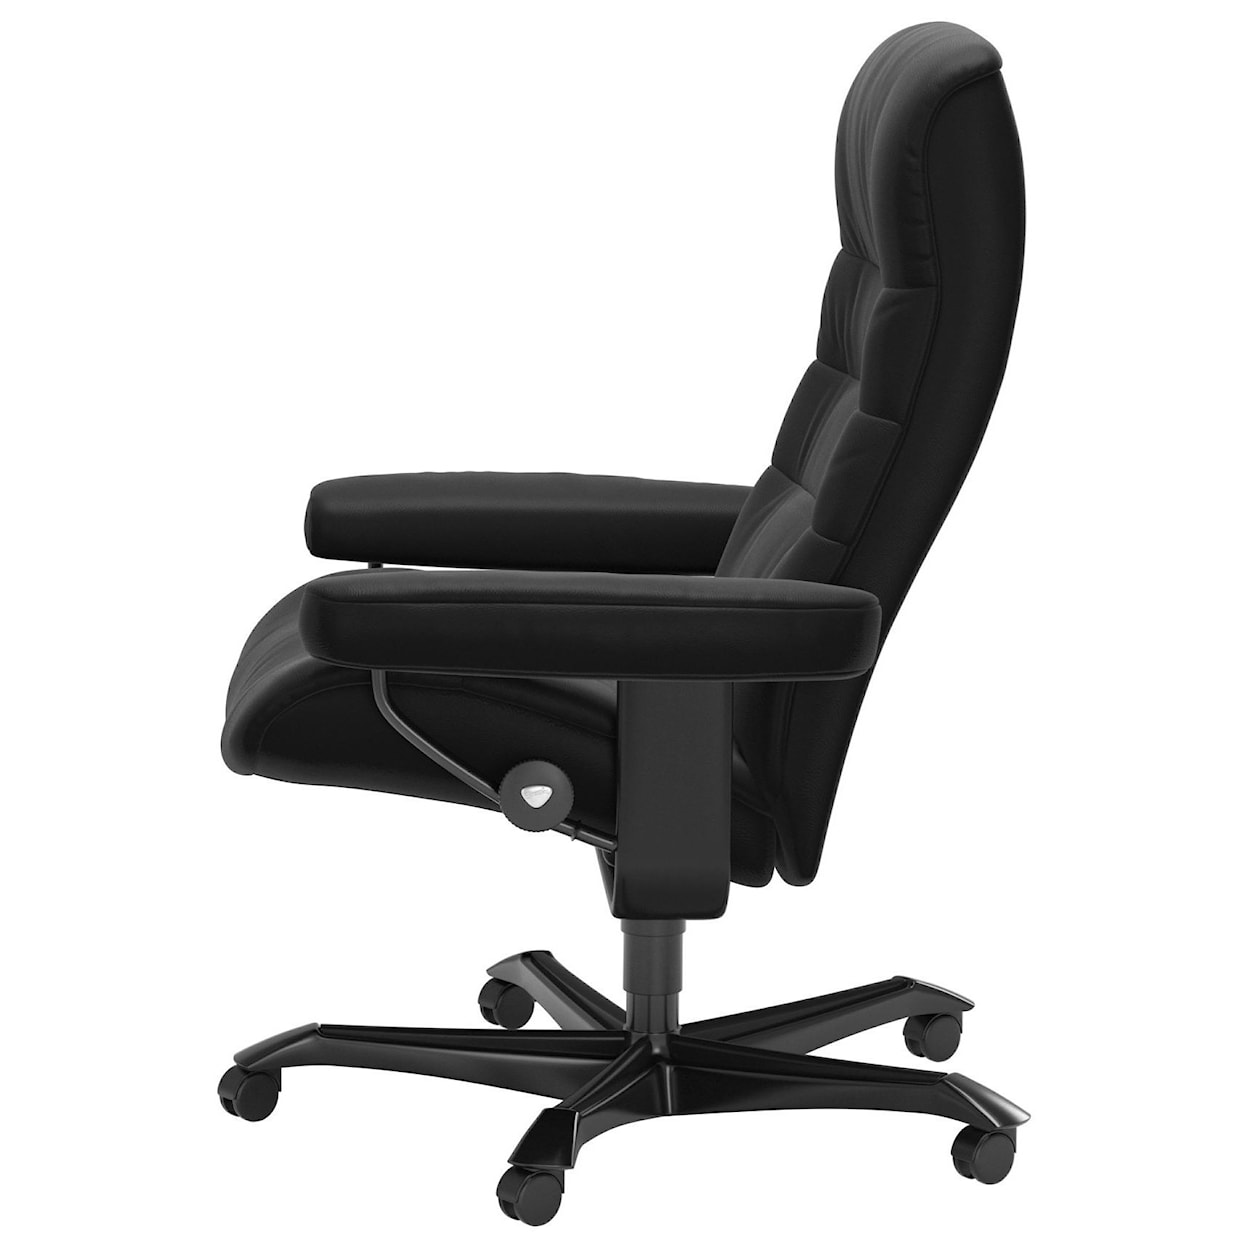 Stressless by Ekornes Opal Executive Home Office Chair